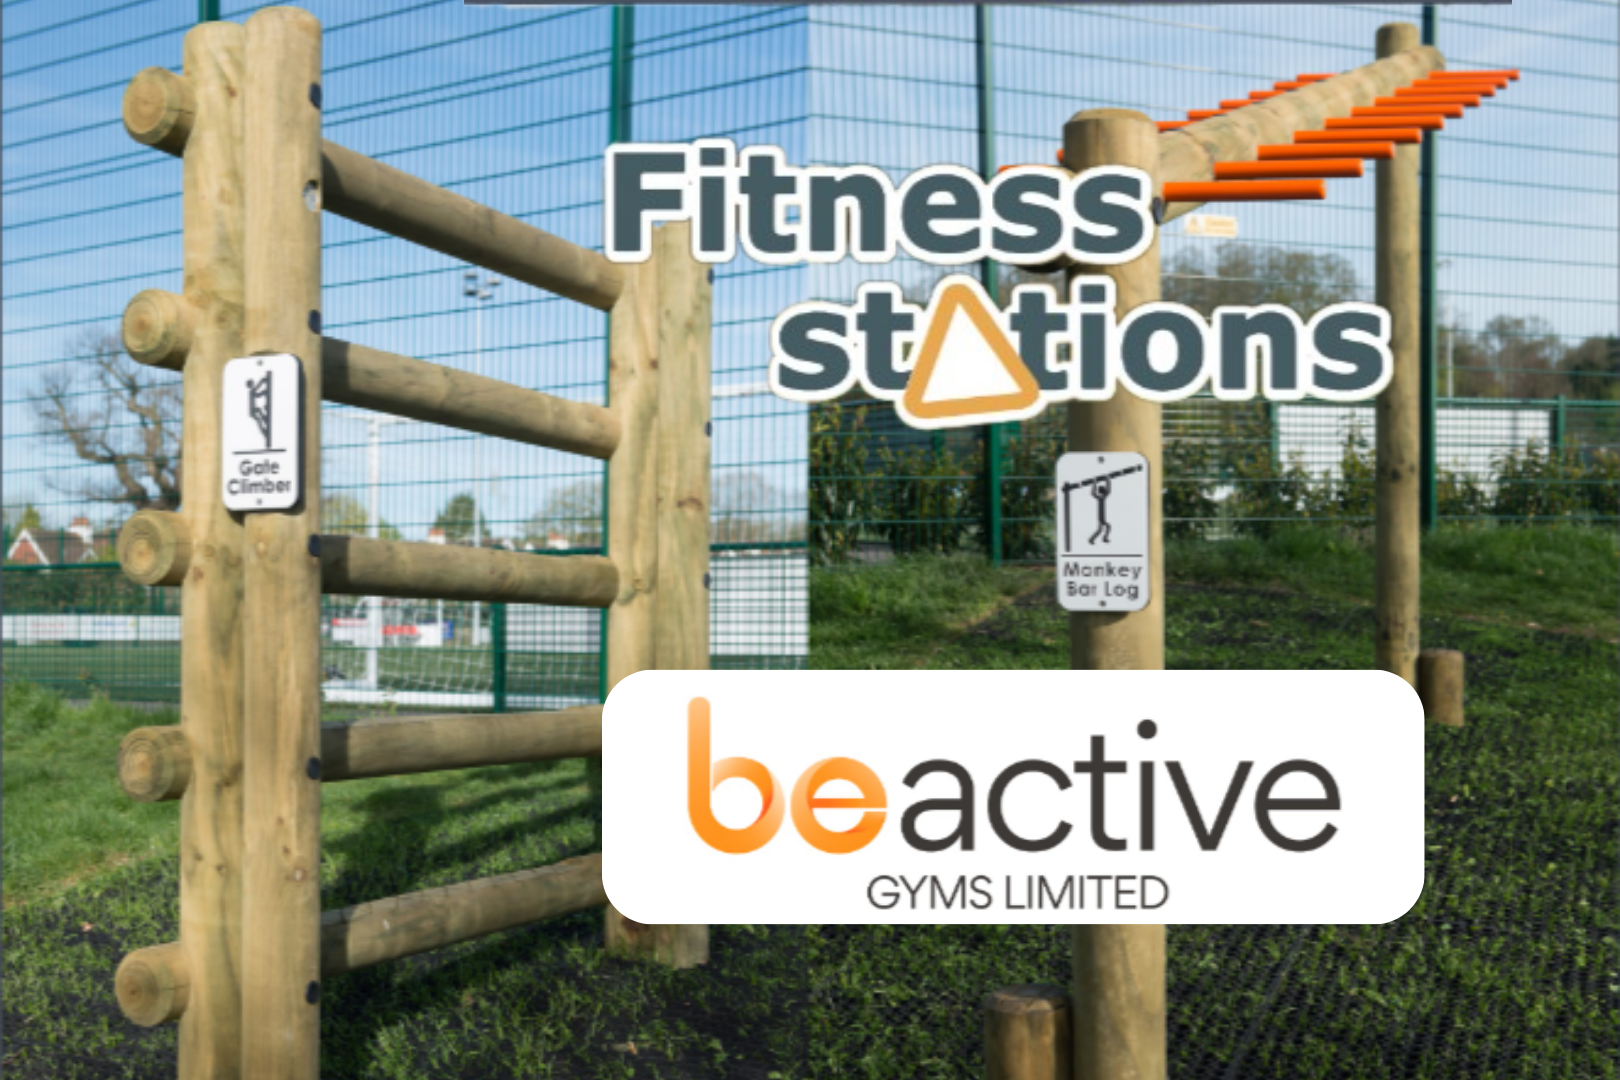 fitness stations beactive gyms